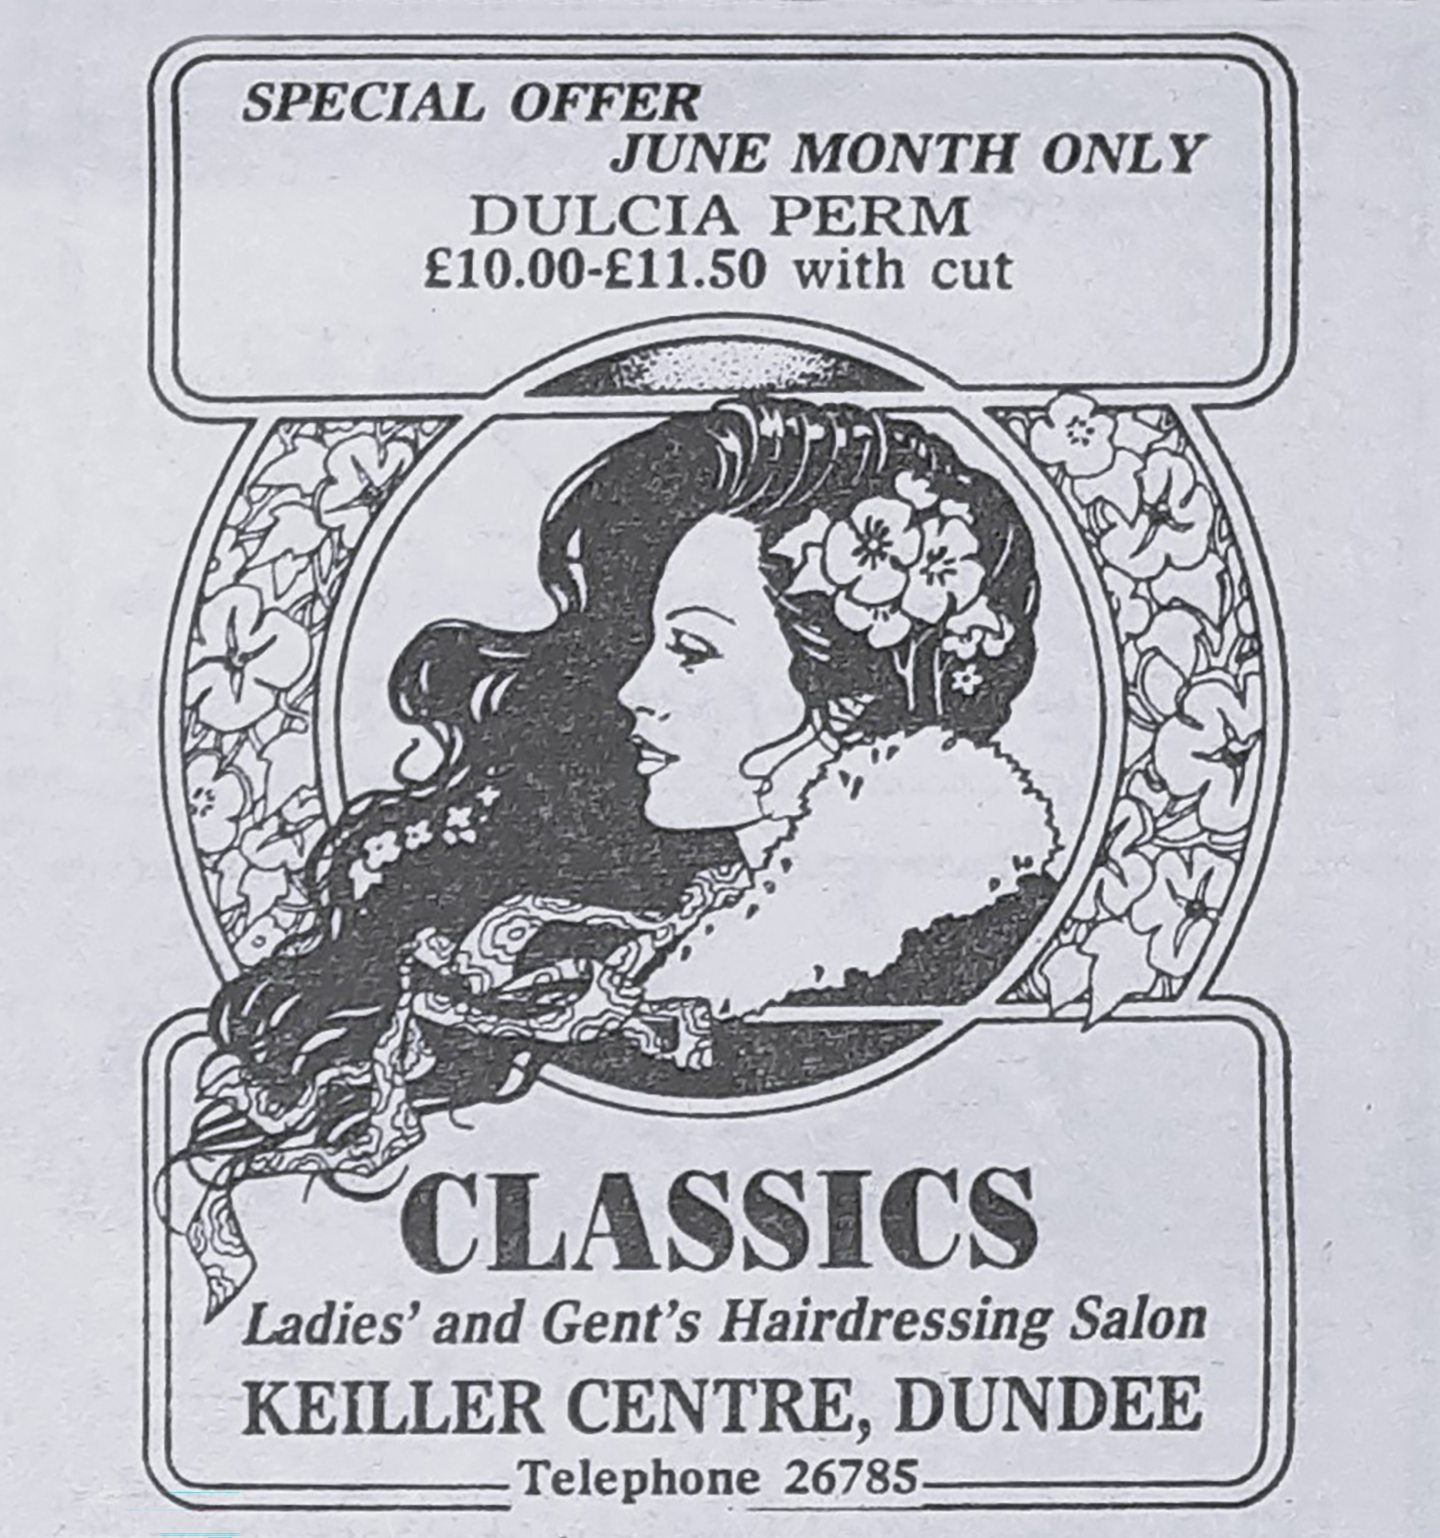 A flyer advertising Classics salon at the Keiller Centre in Dundee